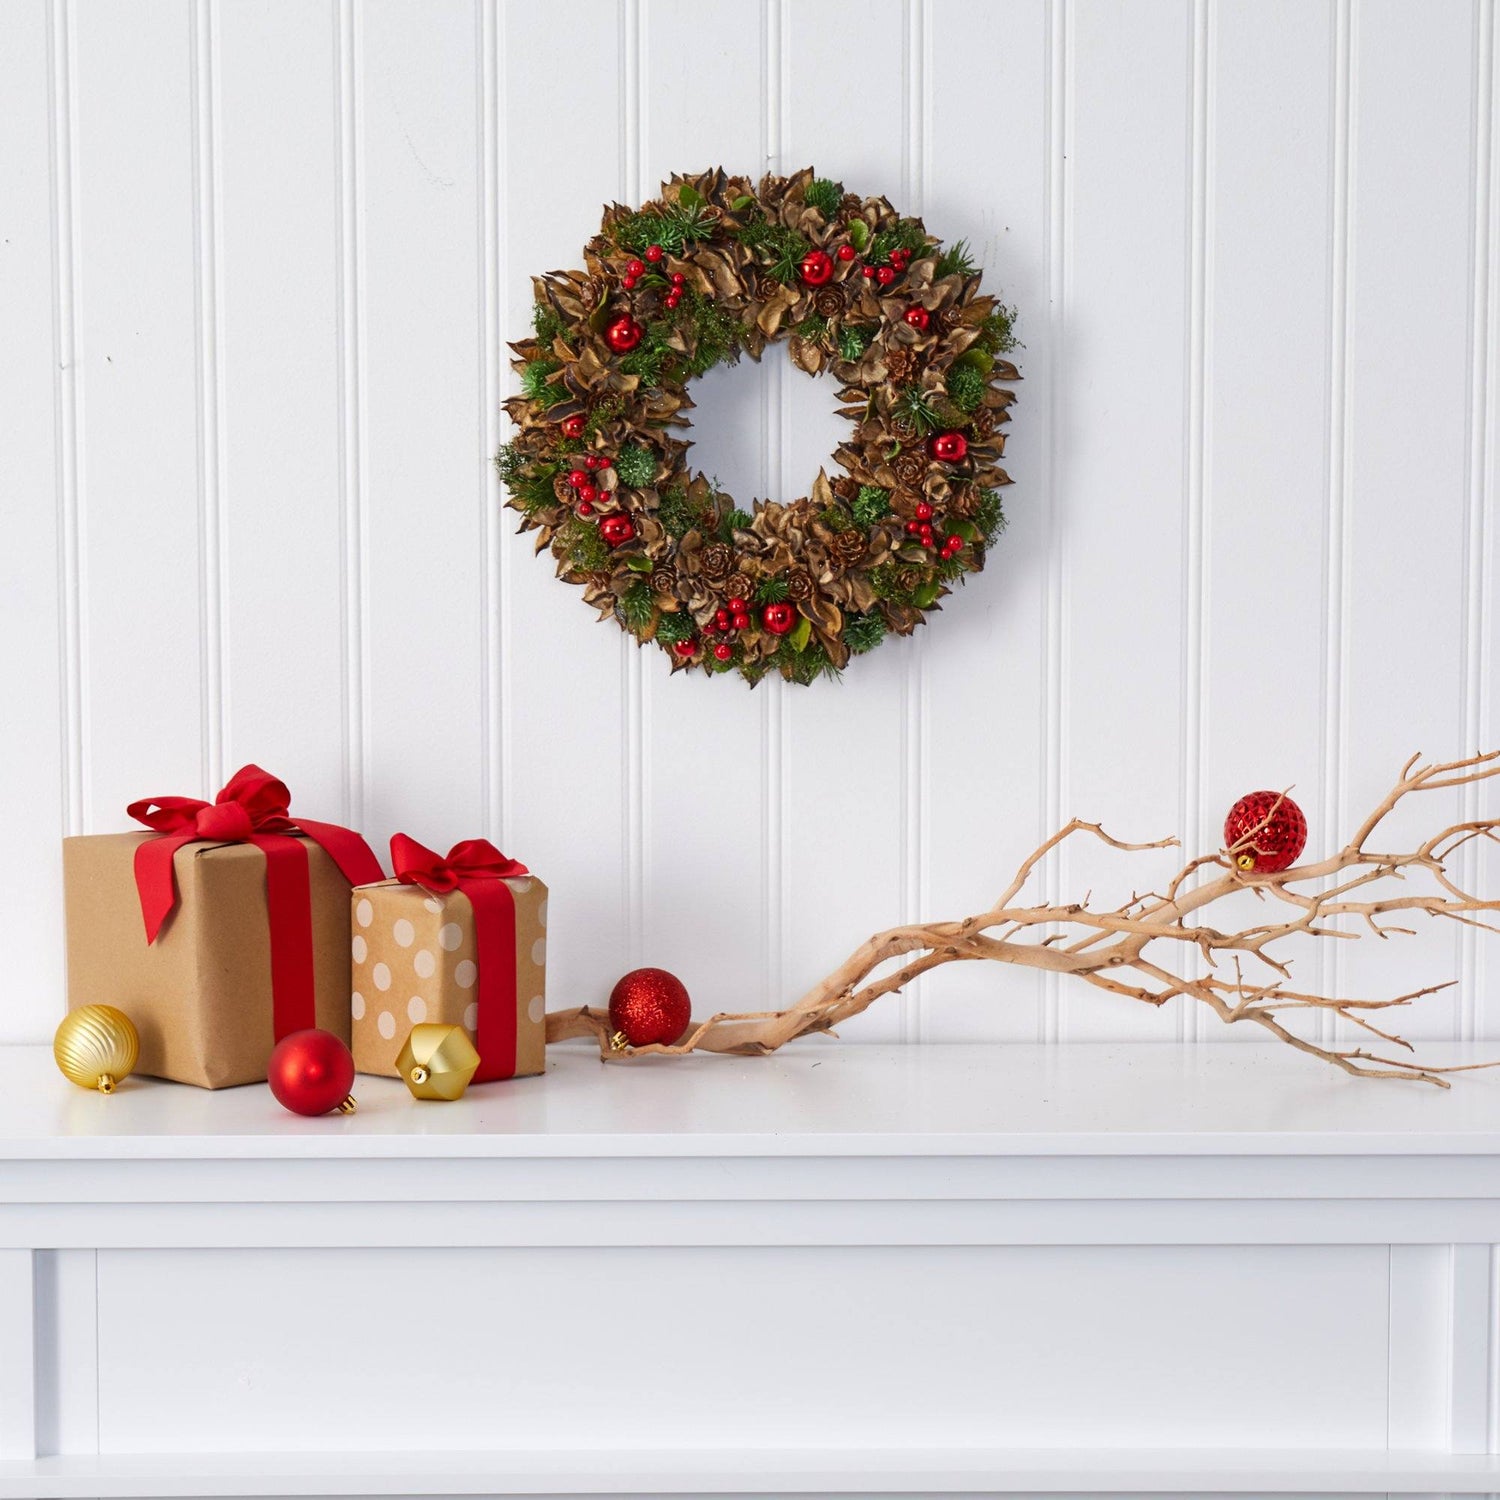 15” Holiday Artificial Wreath with Pine Cones and Ornaments